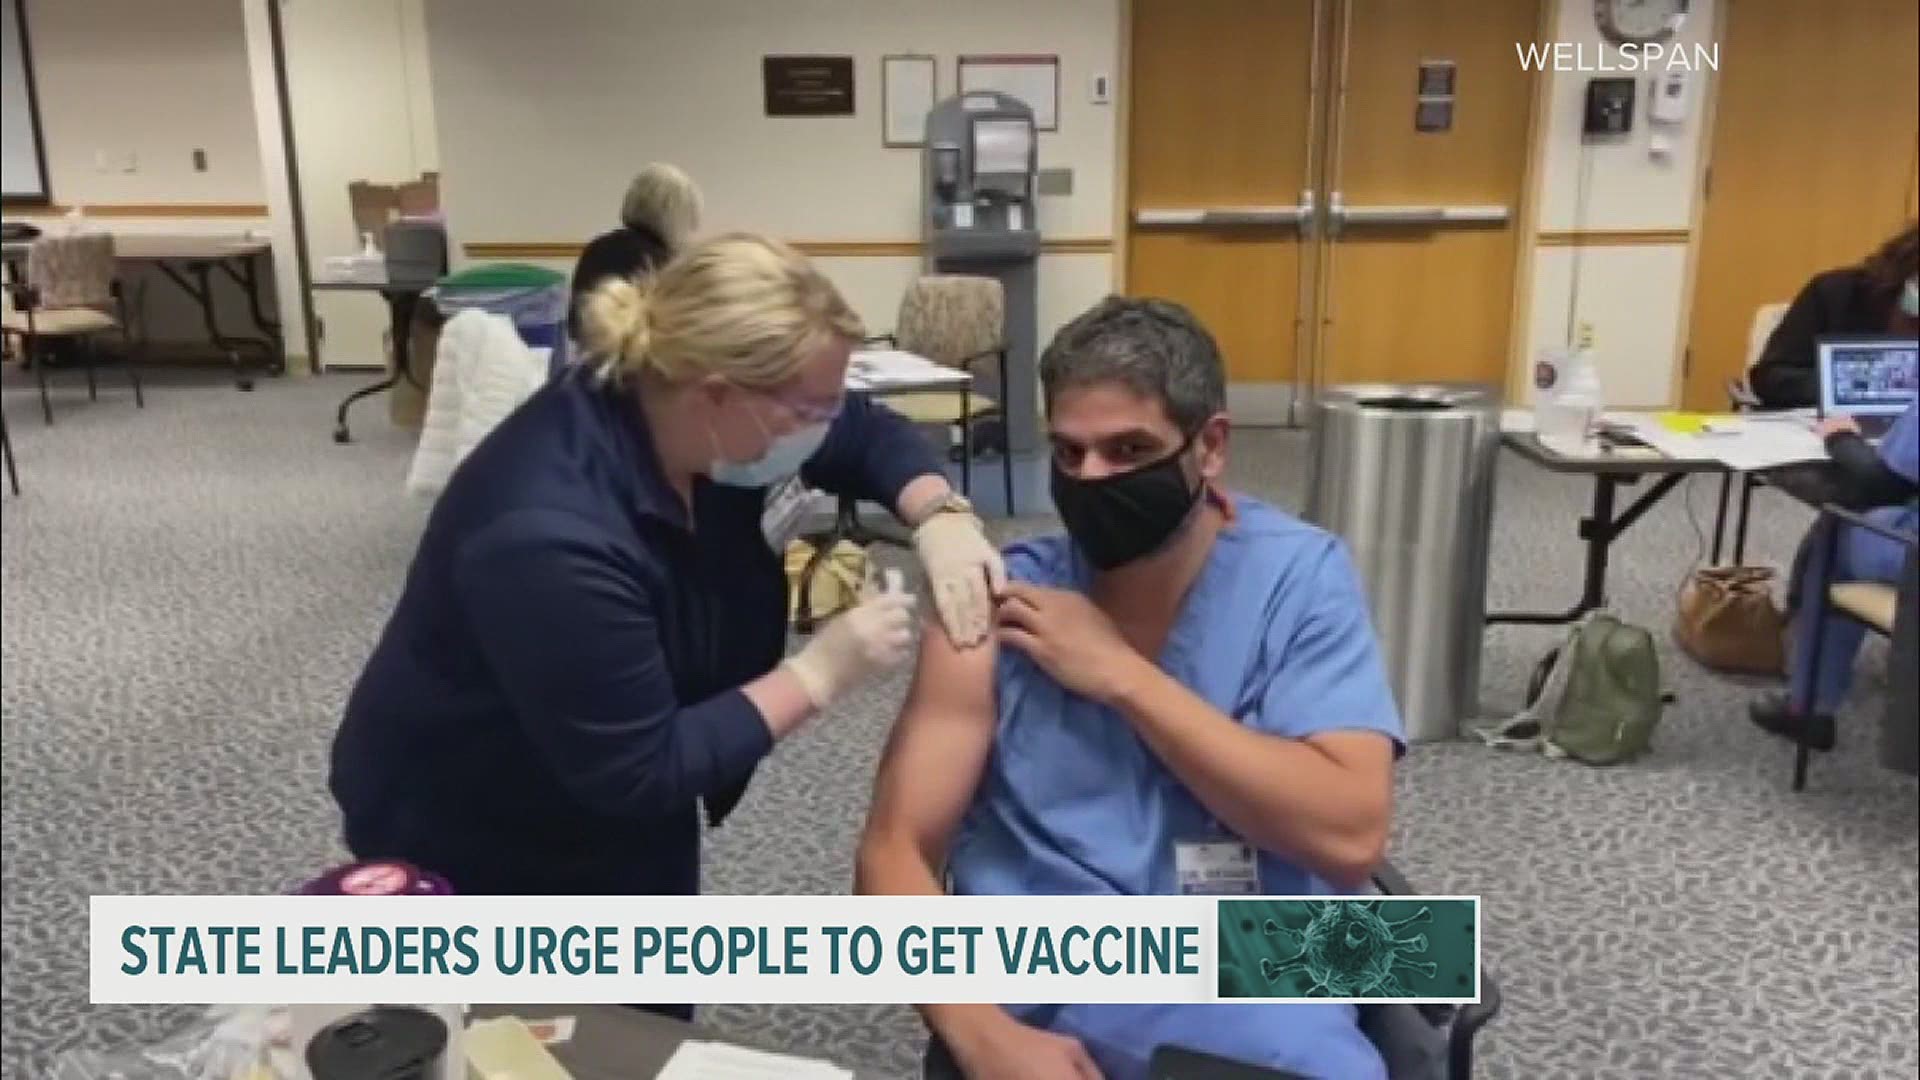 A doctor with Penn State Health Milton S. Hershey Medical Center says the Pfizer and Moderna vaccines are more effective than the flu vaccine.